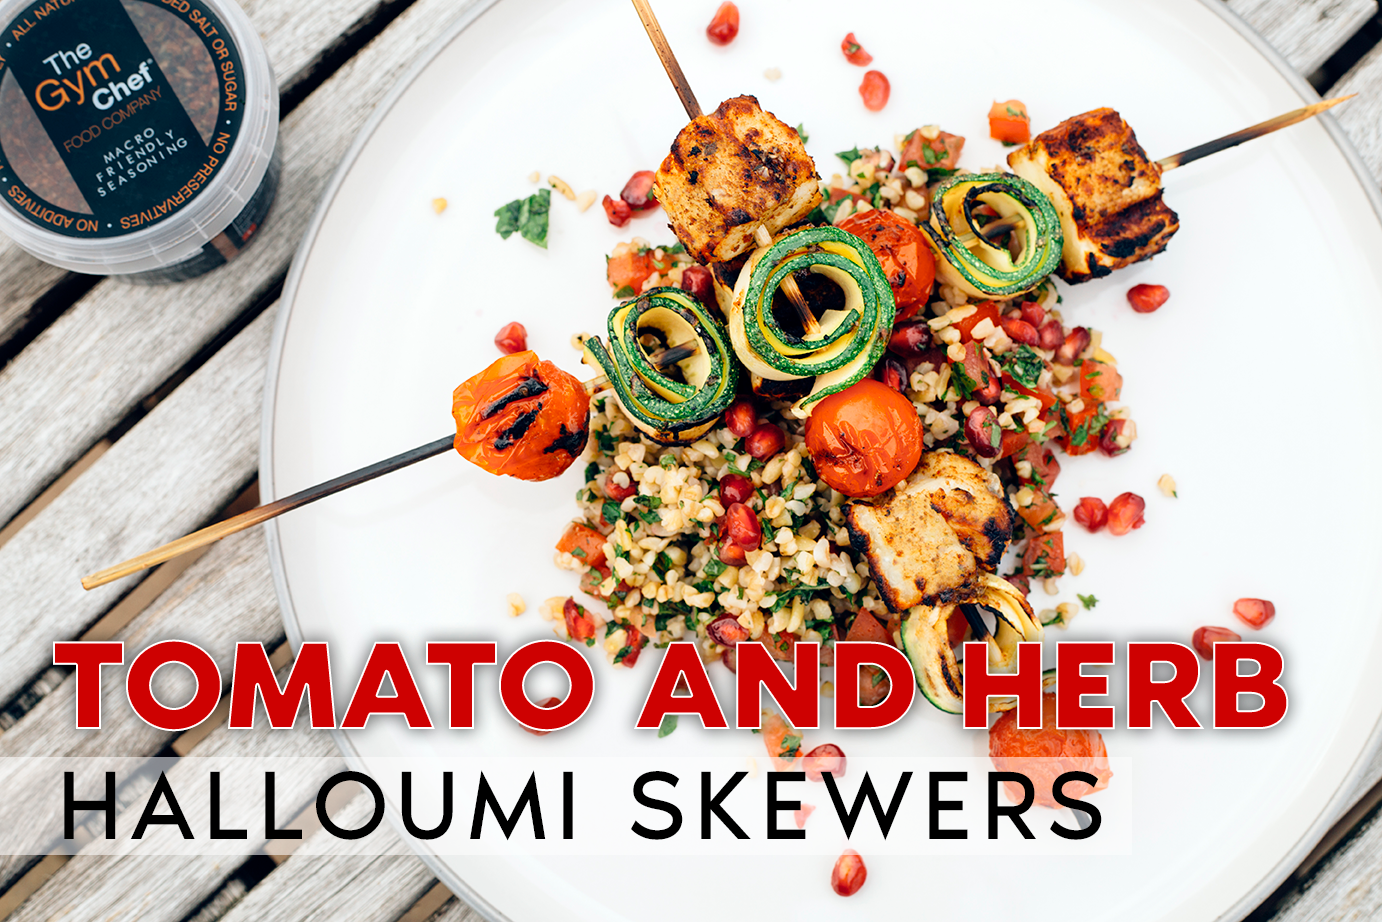 Tomato and herb halloumi skewers - recipe